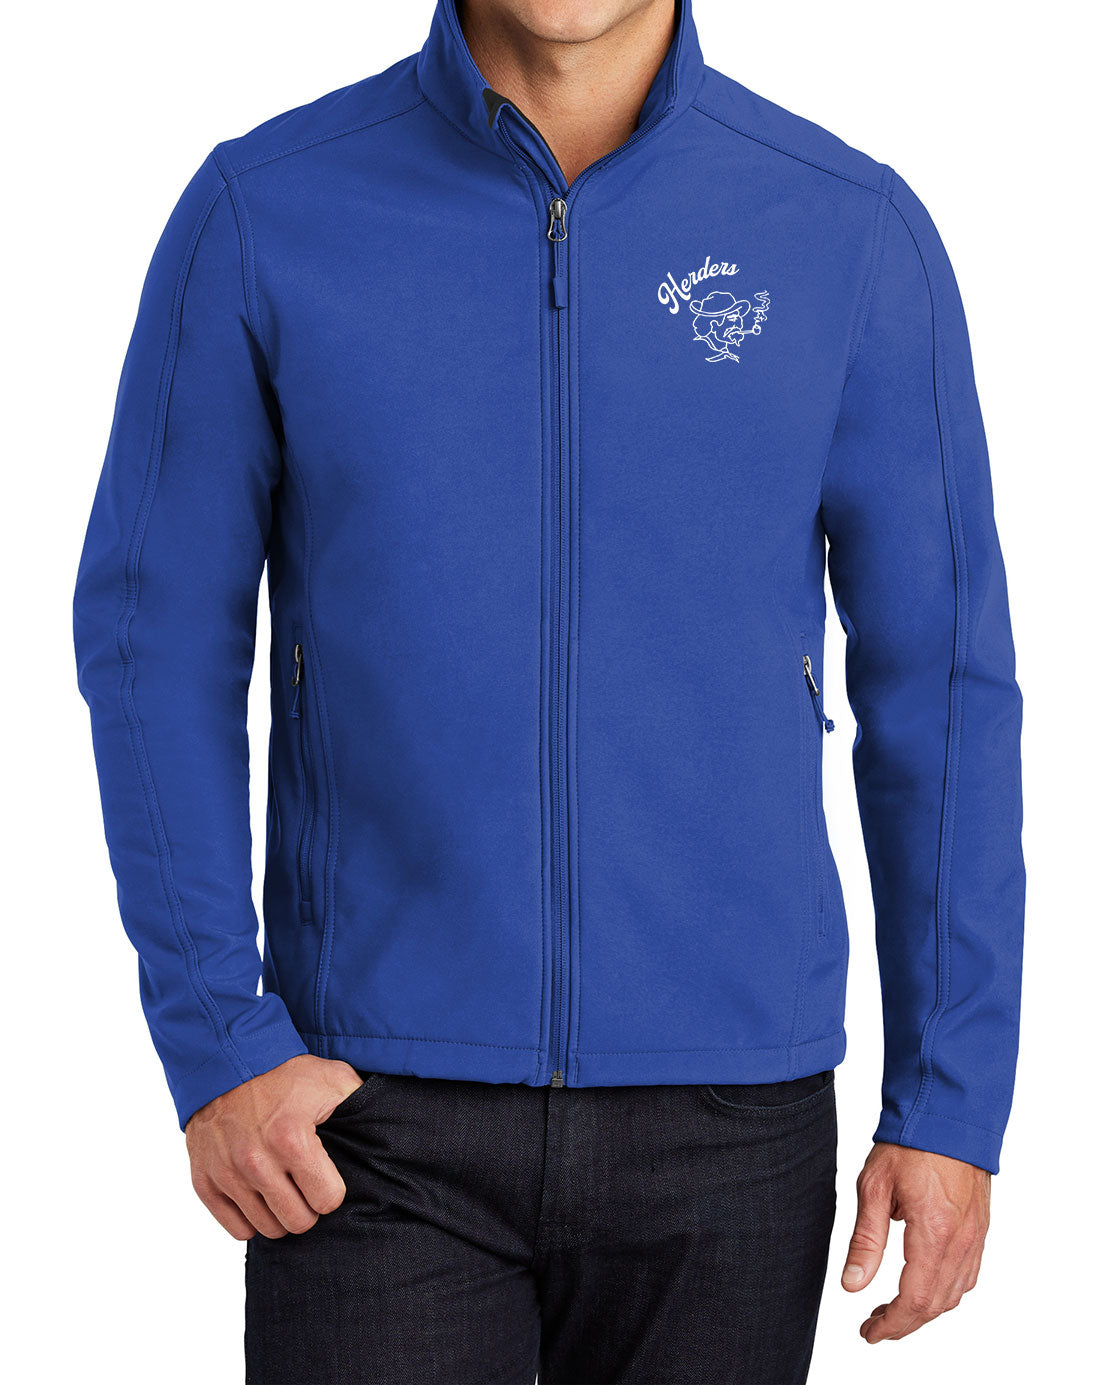 Men's True Soft Shell Royal Jacket Embroidered with Cursive Herder